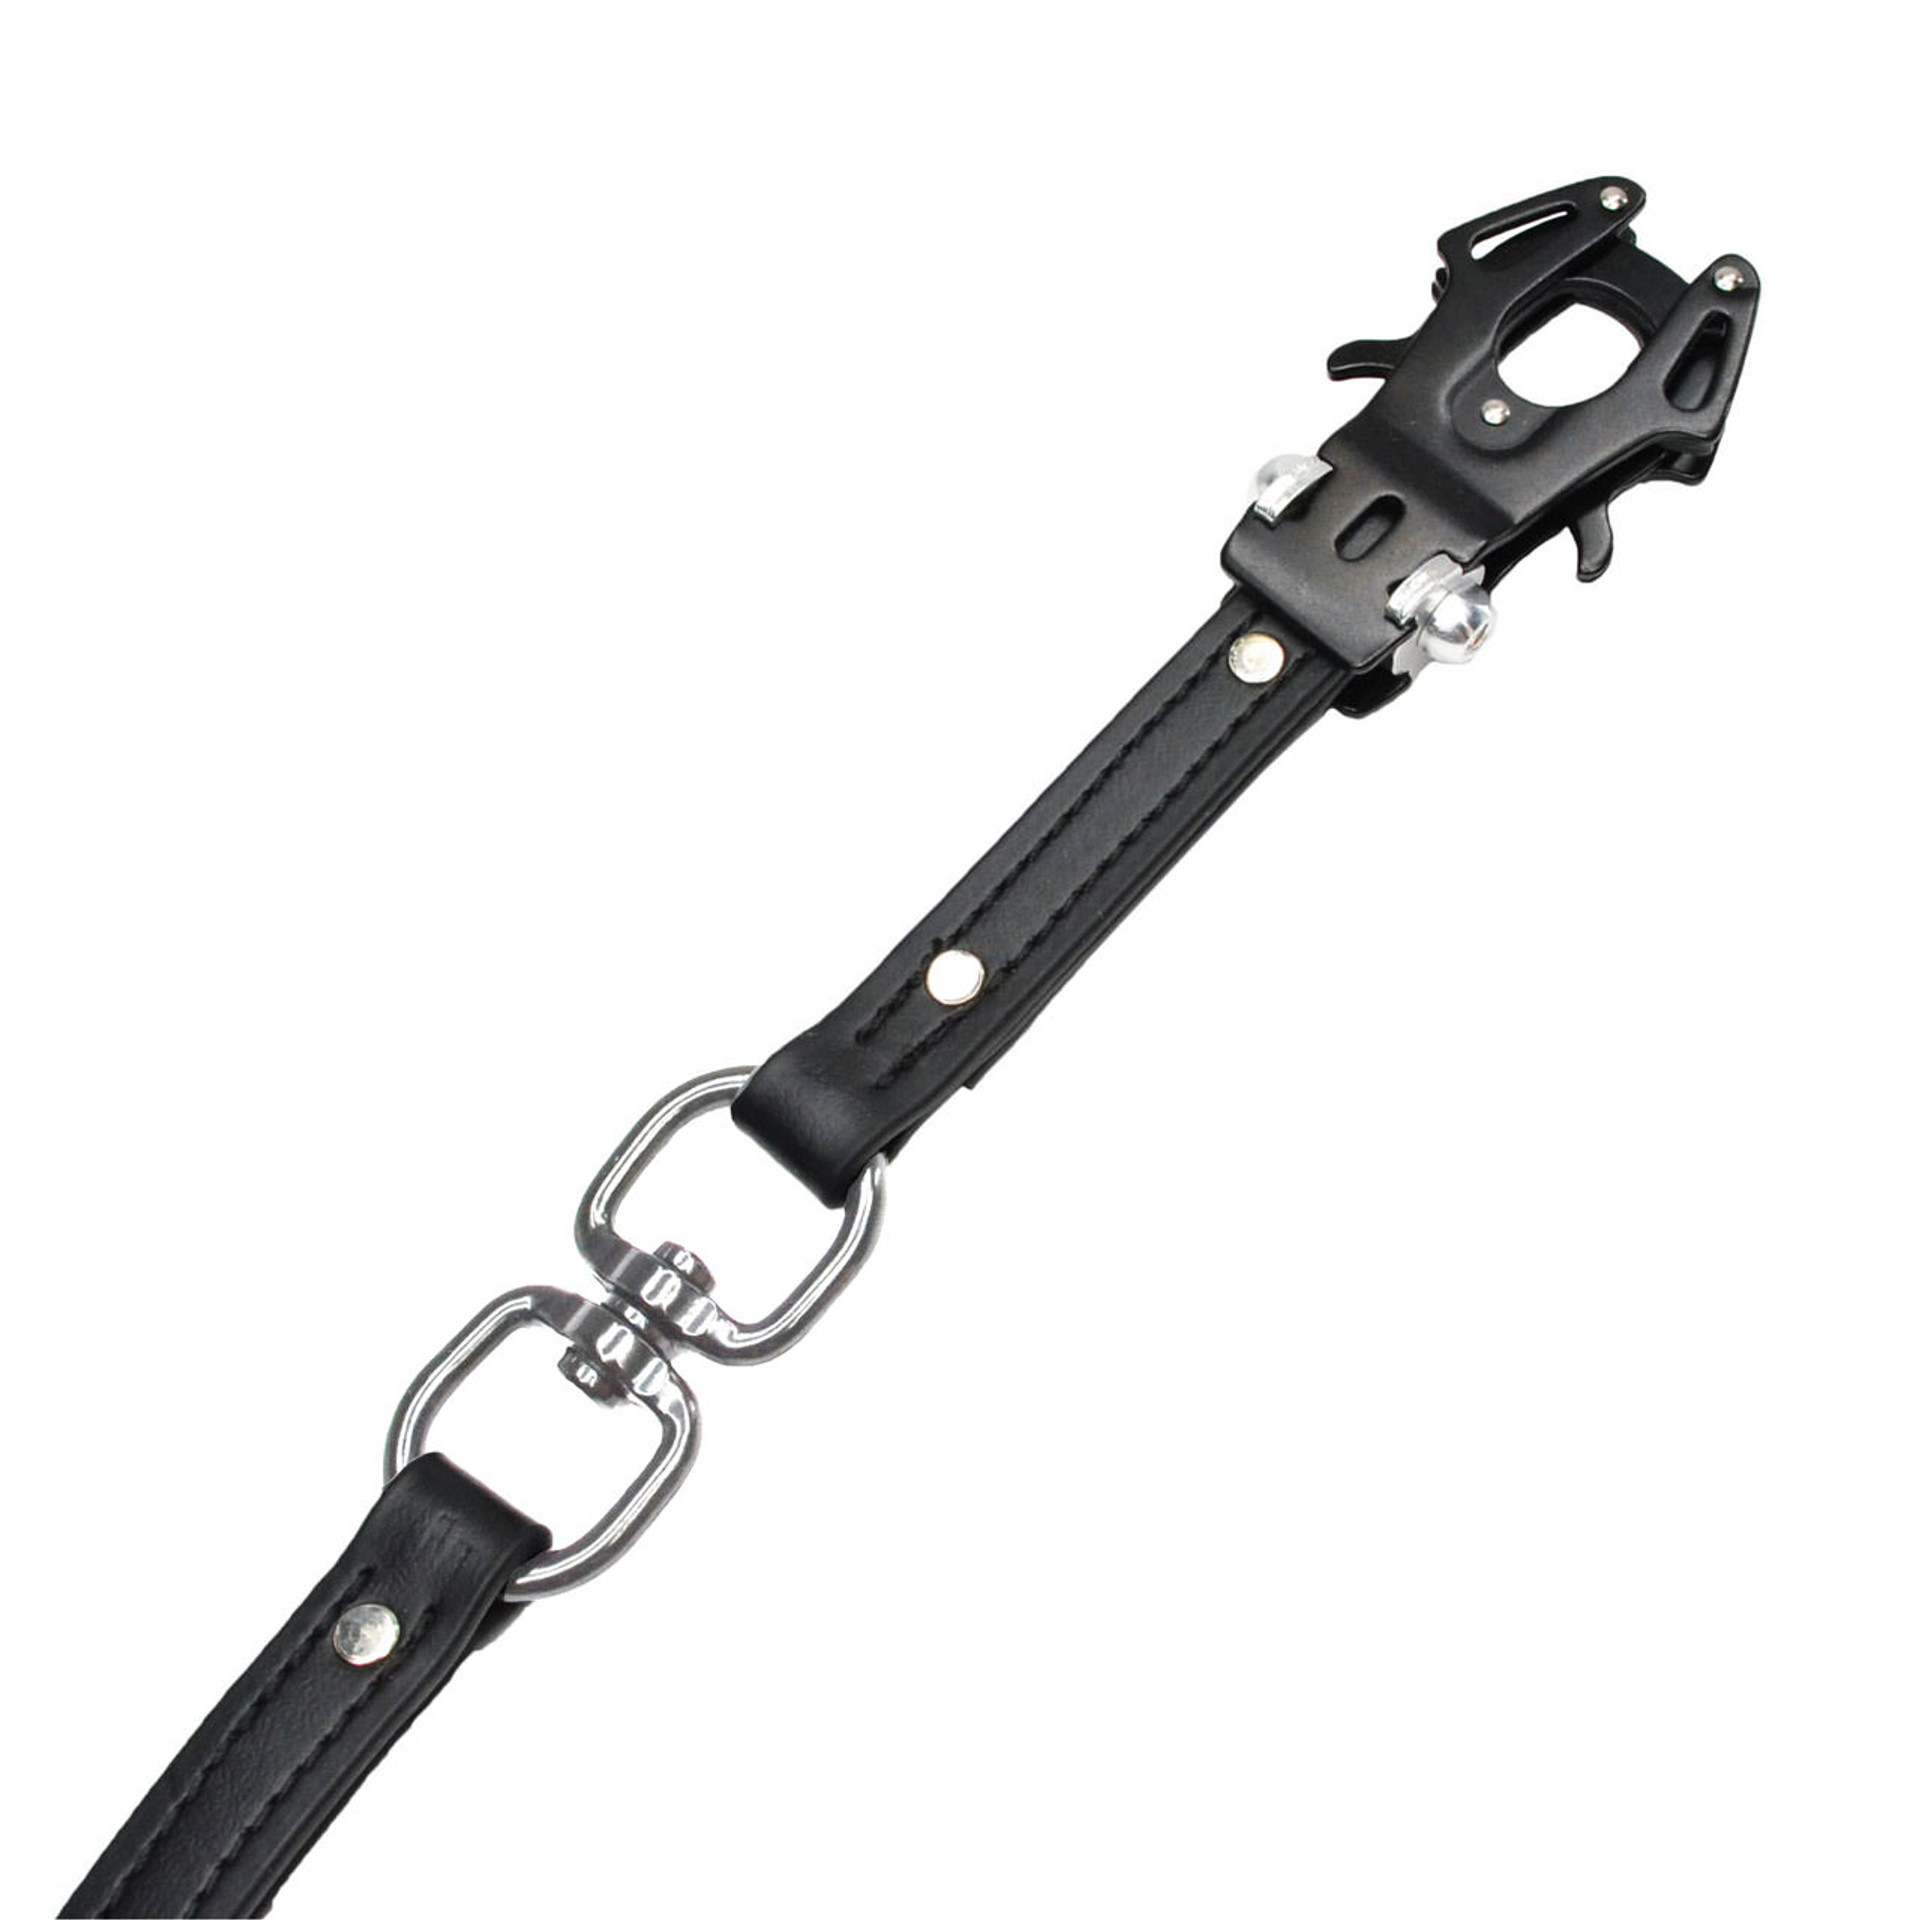 Trikos Dog Leash | Tough and Durable K9 Leash - Ray Allen Manufacturing